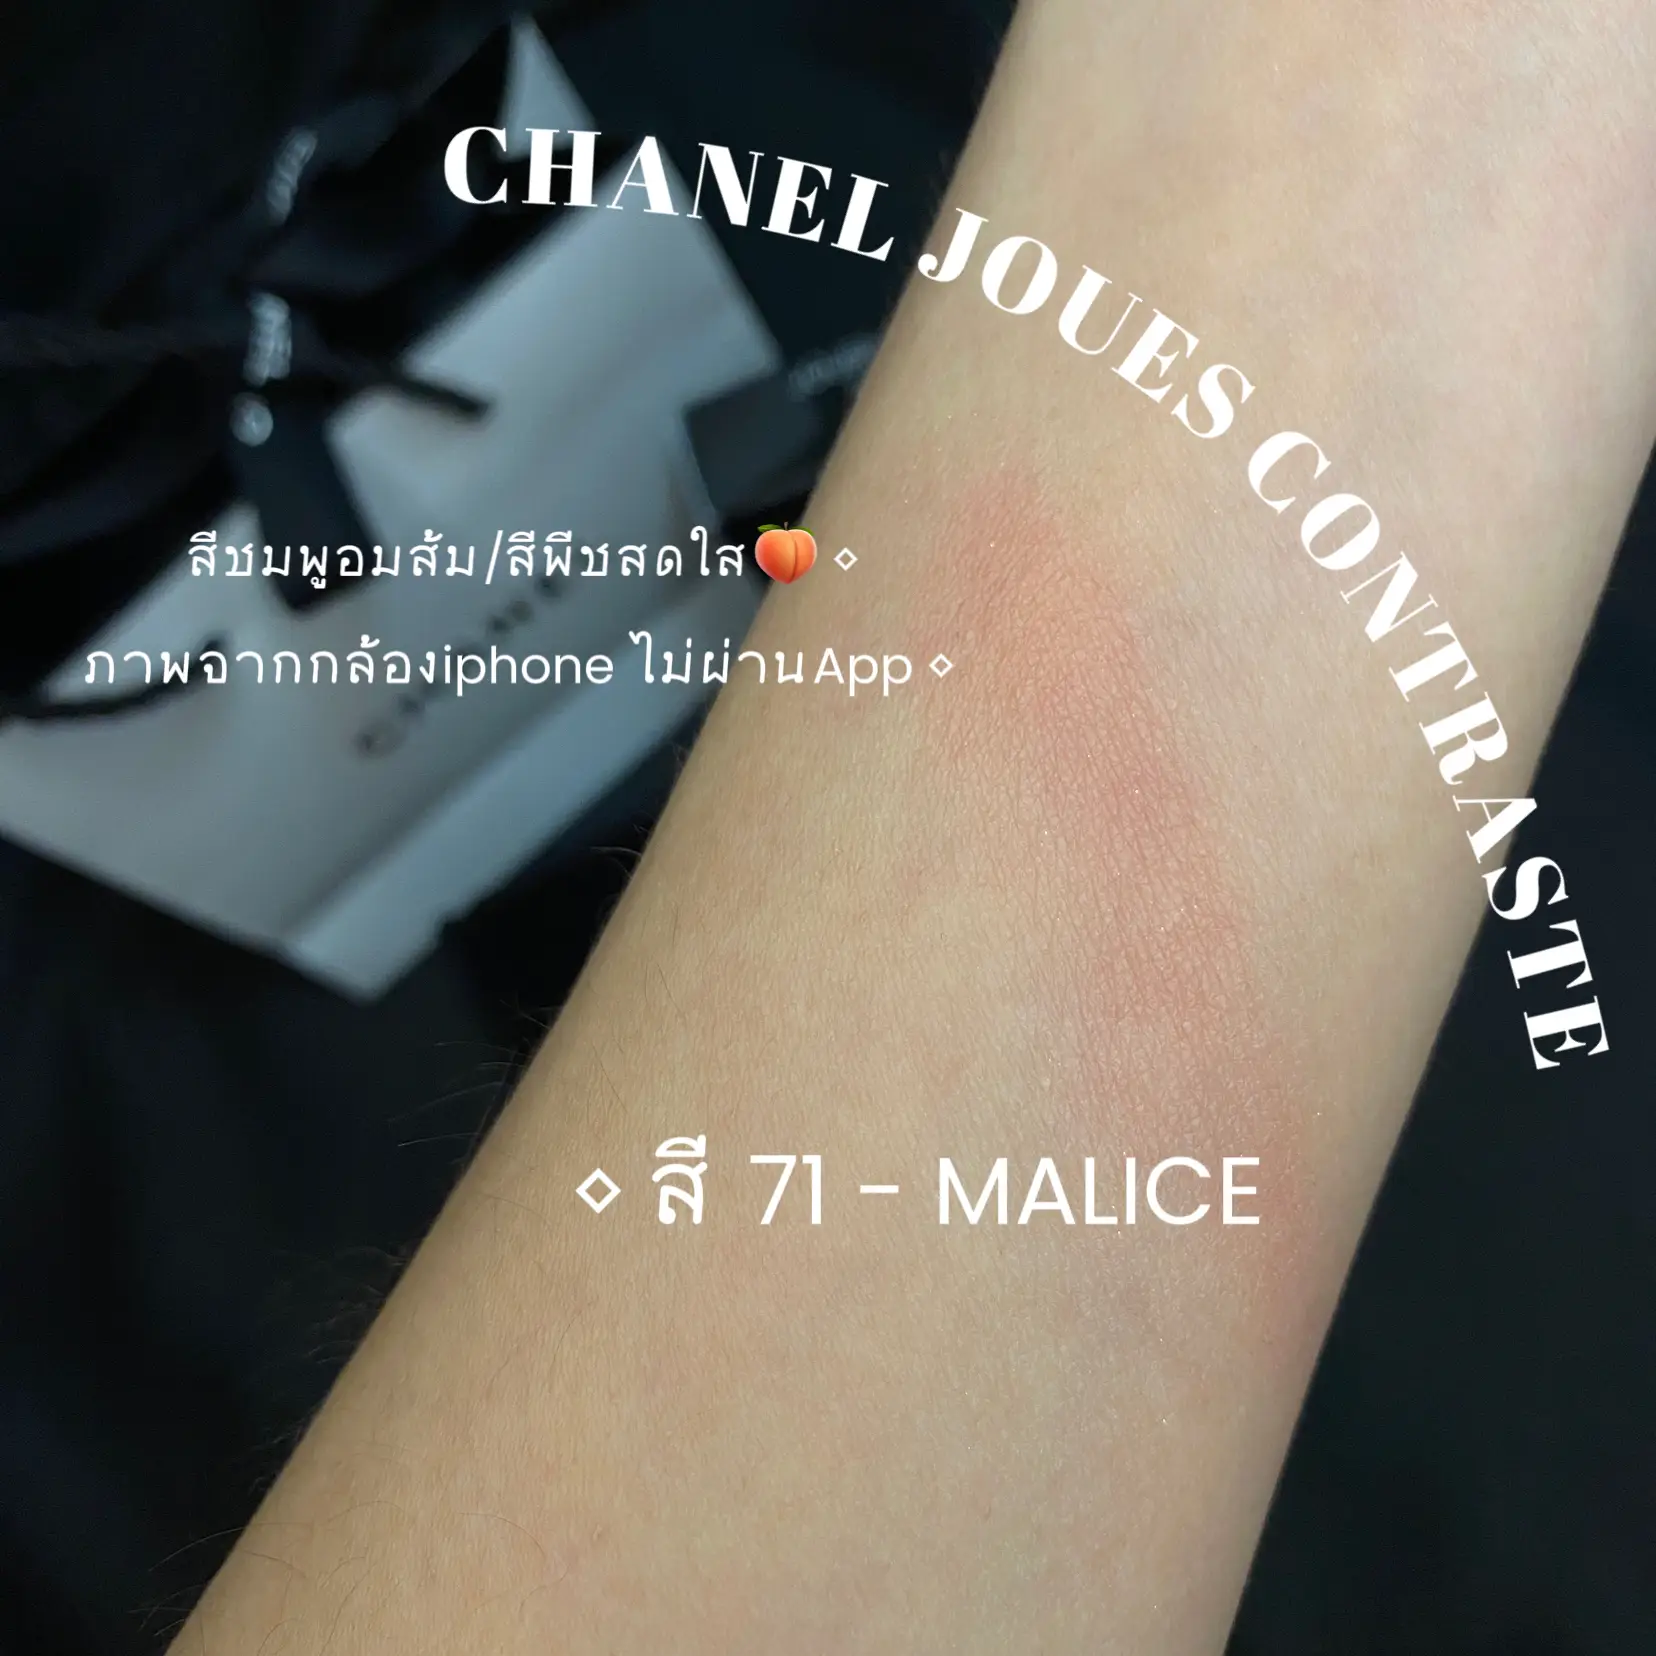 BLUSH REVIEW CHANEL JOUES CONTRASTE • 71 - MALICE